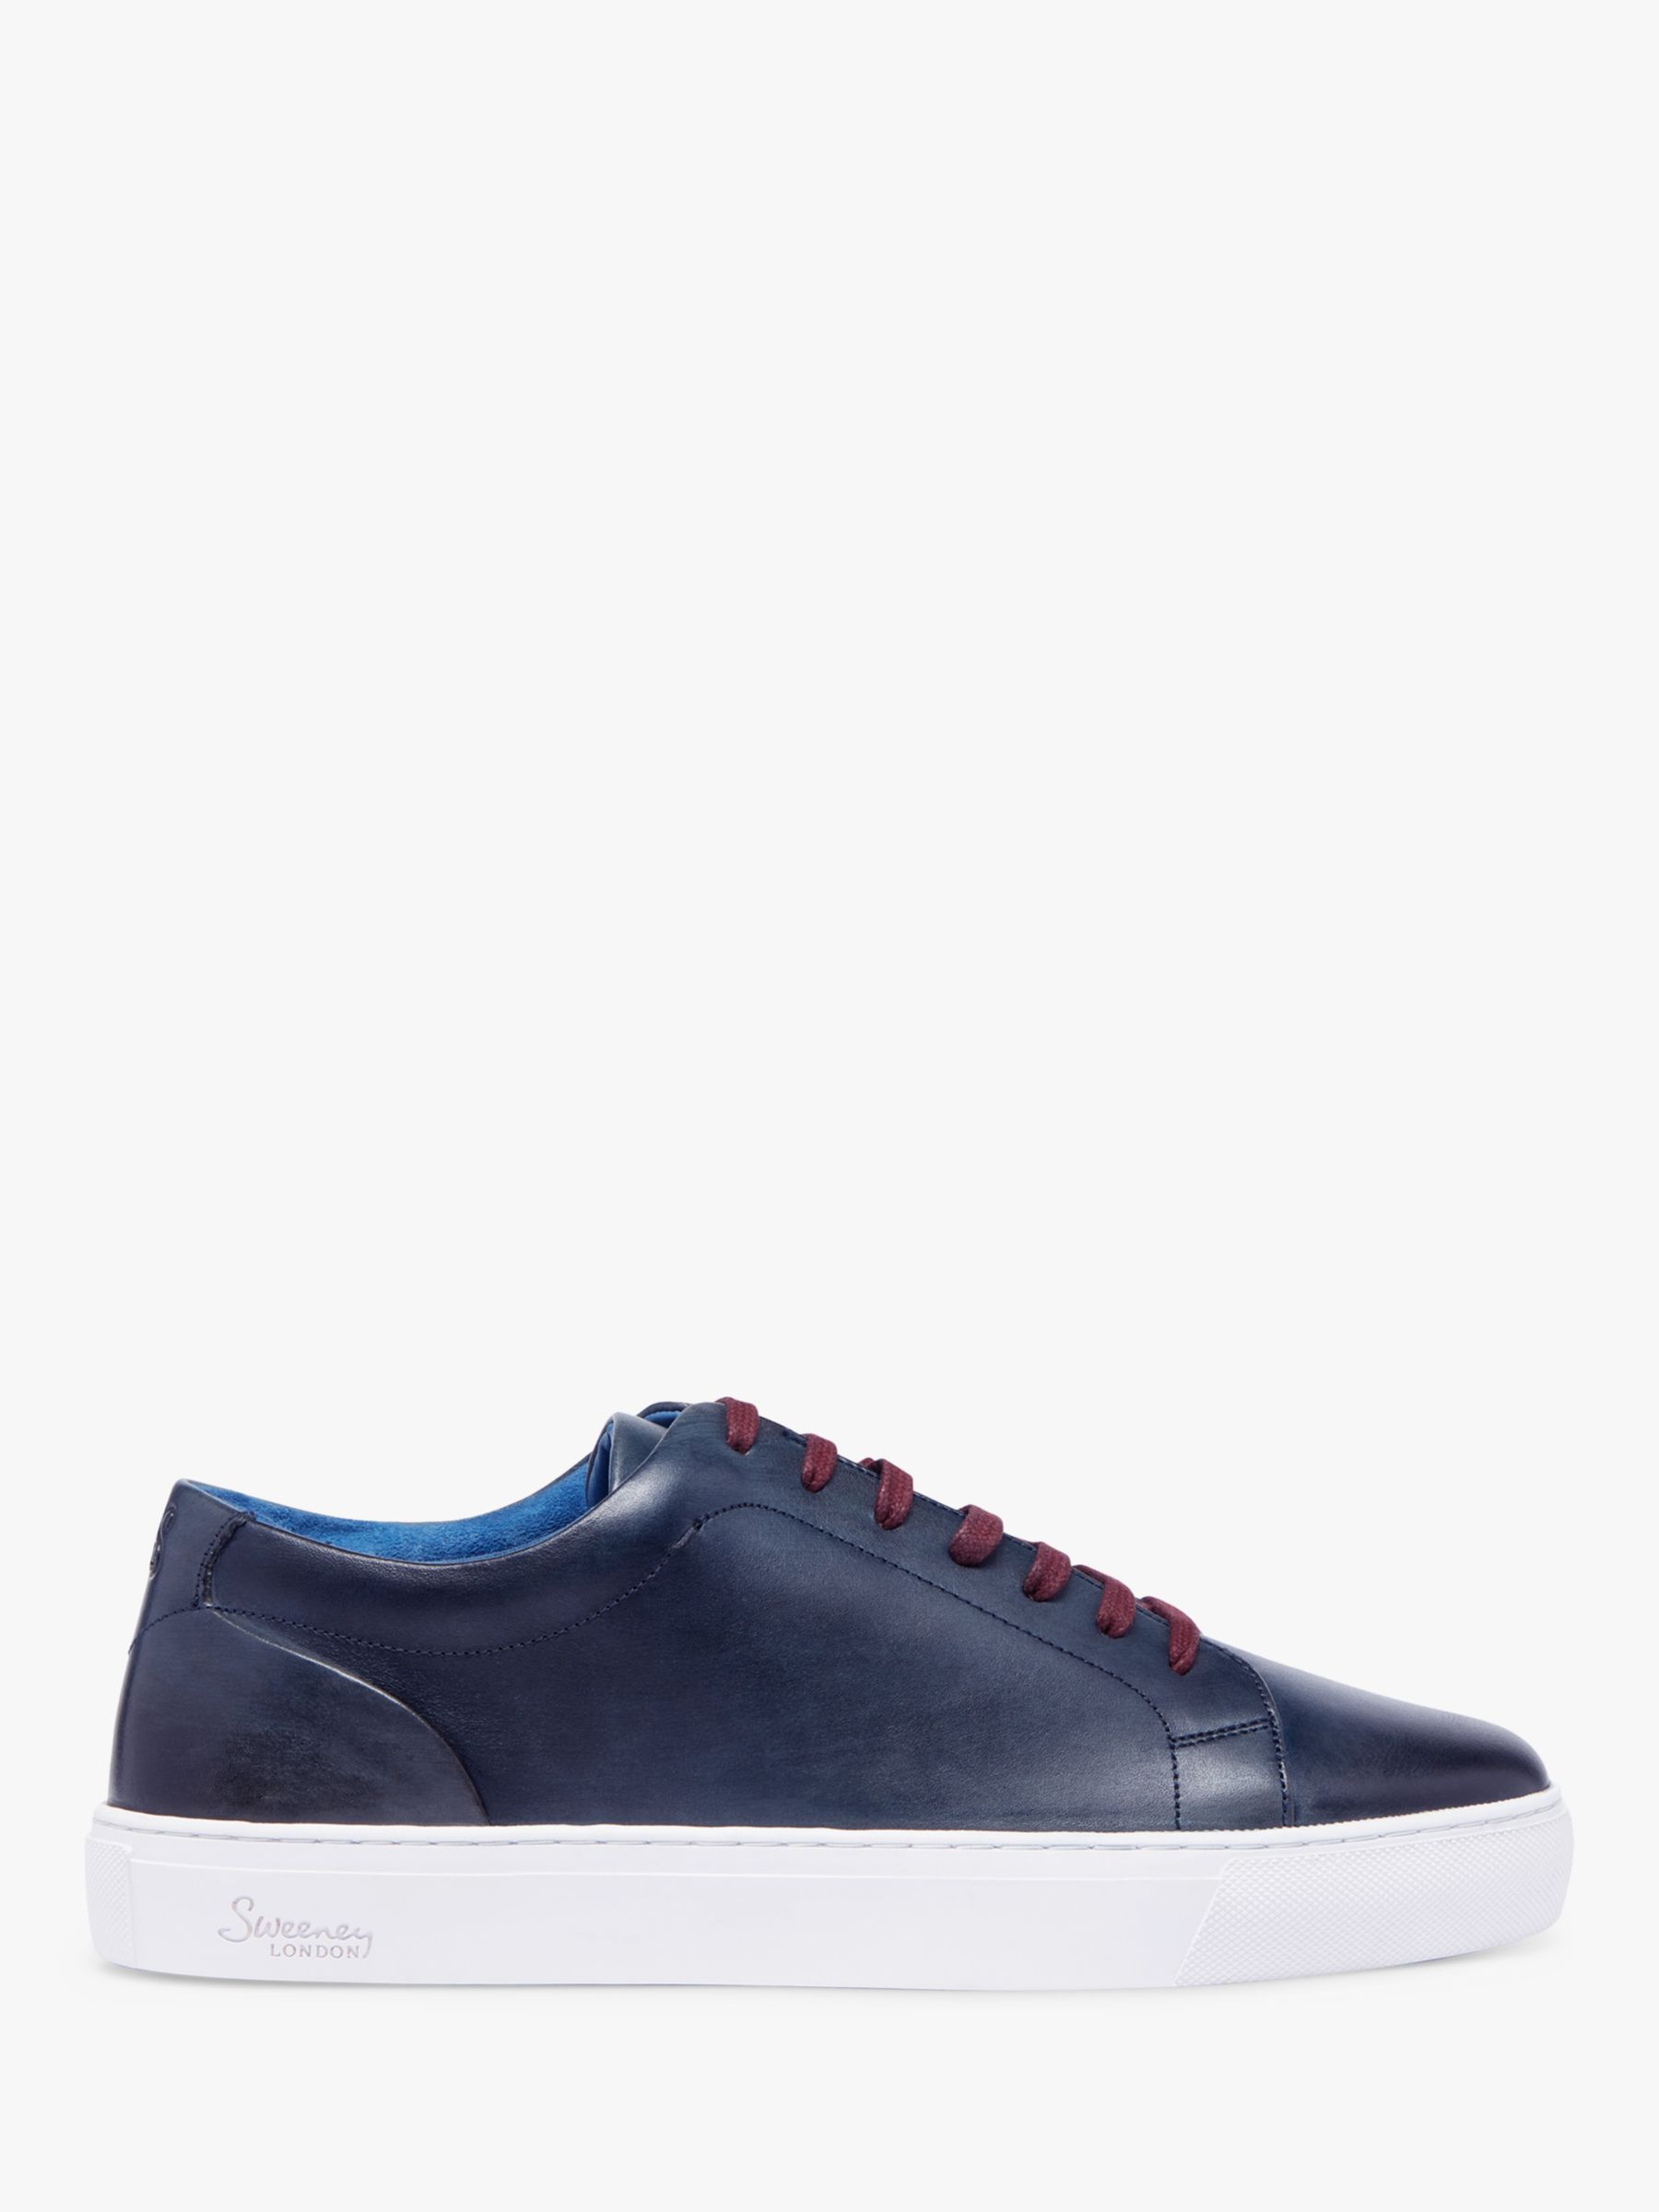 Oliver Sweeney Hayle Leather Trainers, Navy at John Lewis & Partners